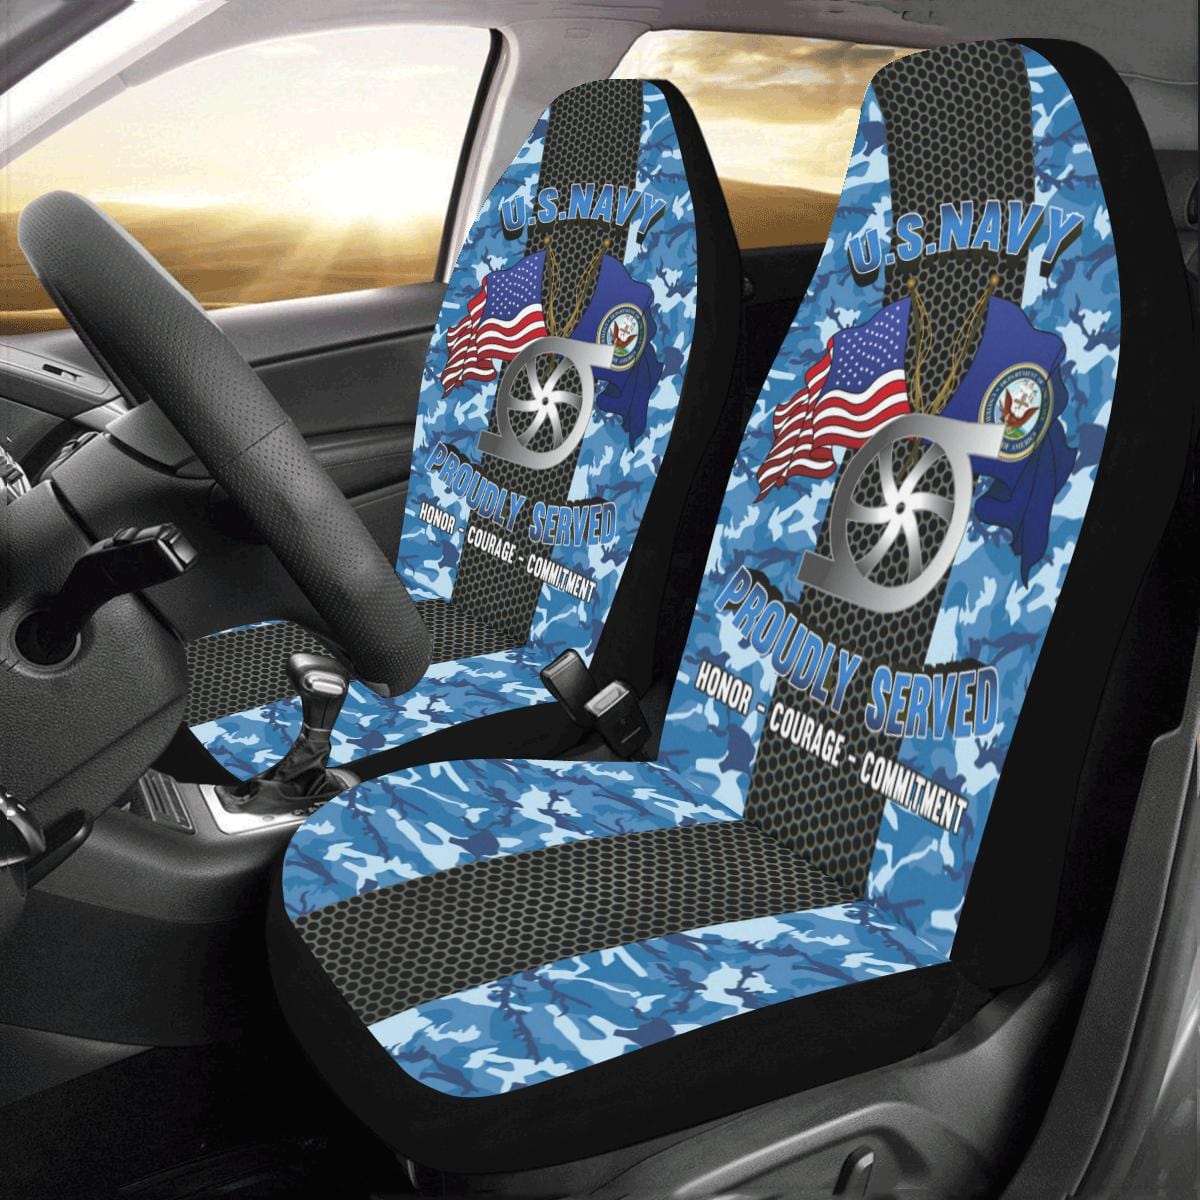 Navy Gas Turbine Systems Technician Navy GS Car Seat Covers (Set of 2)-SeatCovers-Navy-Rate-Veterans Nation